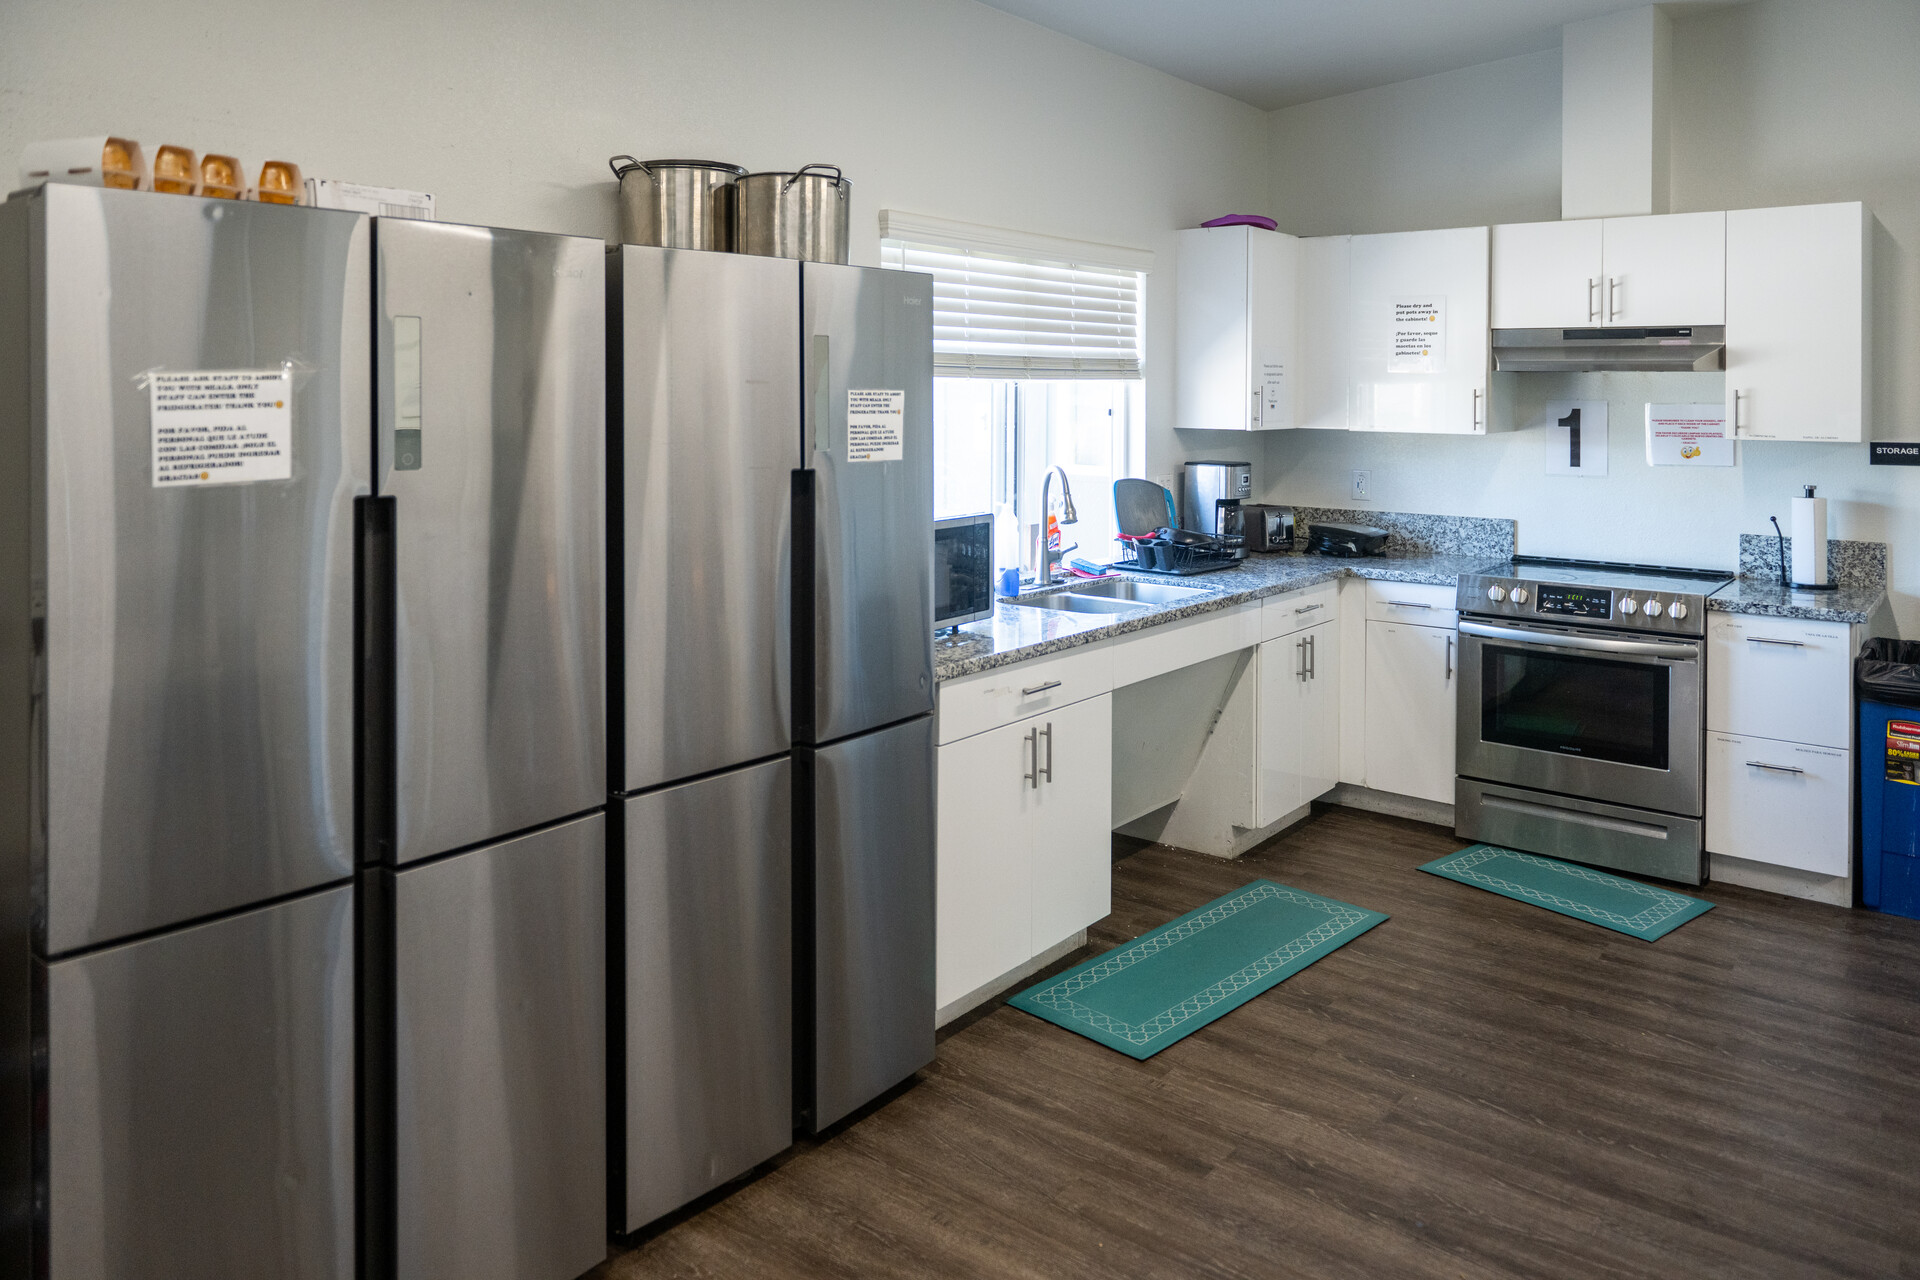 A new-looking kitchen with 2 stainless steel fridges, a sink and an oven.